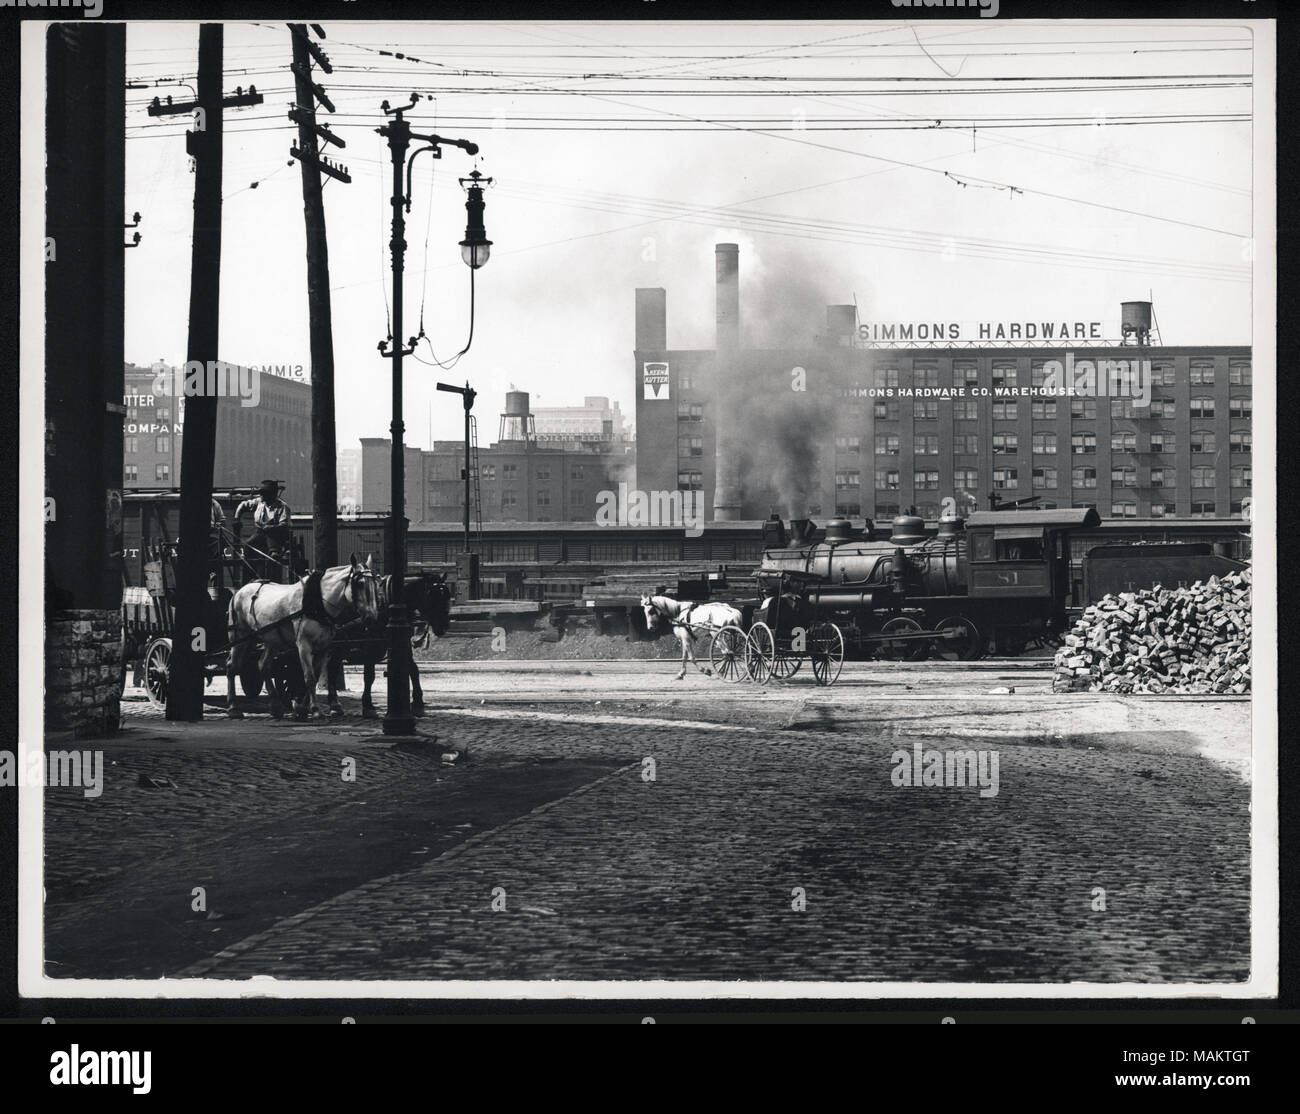 Horizontal, black and white photograph of a brick factory building for Simmons Hardware Co. Horse-drawn carriages and a train are at the front of the photograph. Title: Simmons Hardware seen from Eighth and Spruce.  . between circa 1800 and circa 1900. Swekosky, William G., 1895-1964 Stock Photo